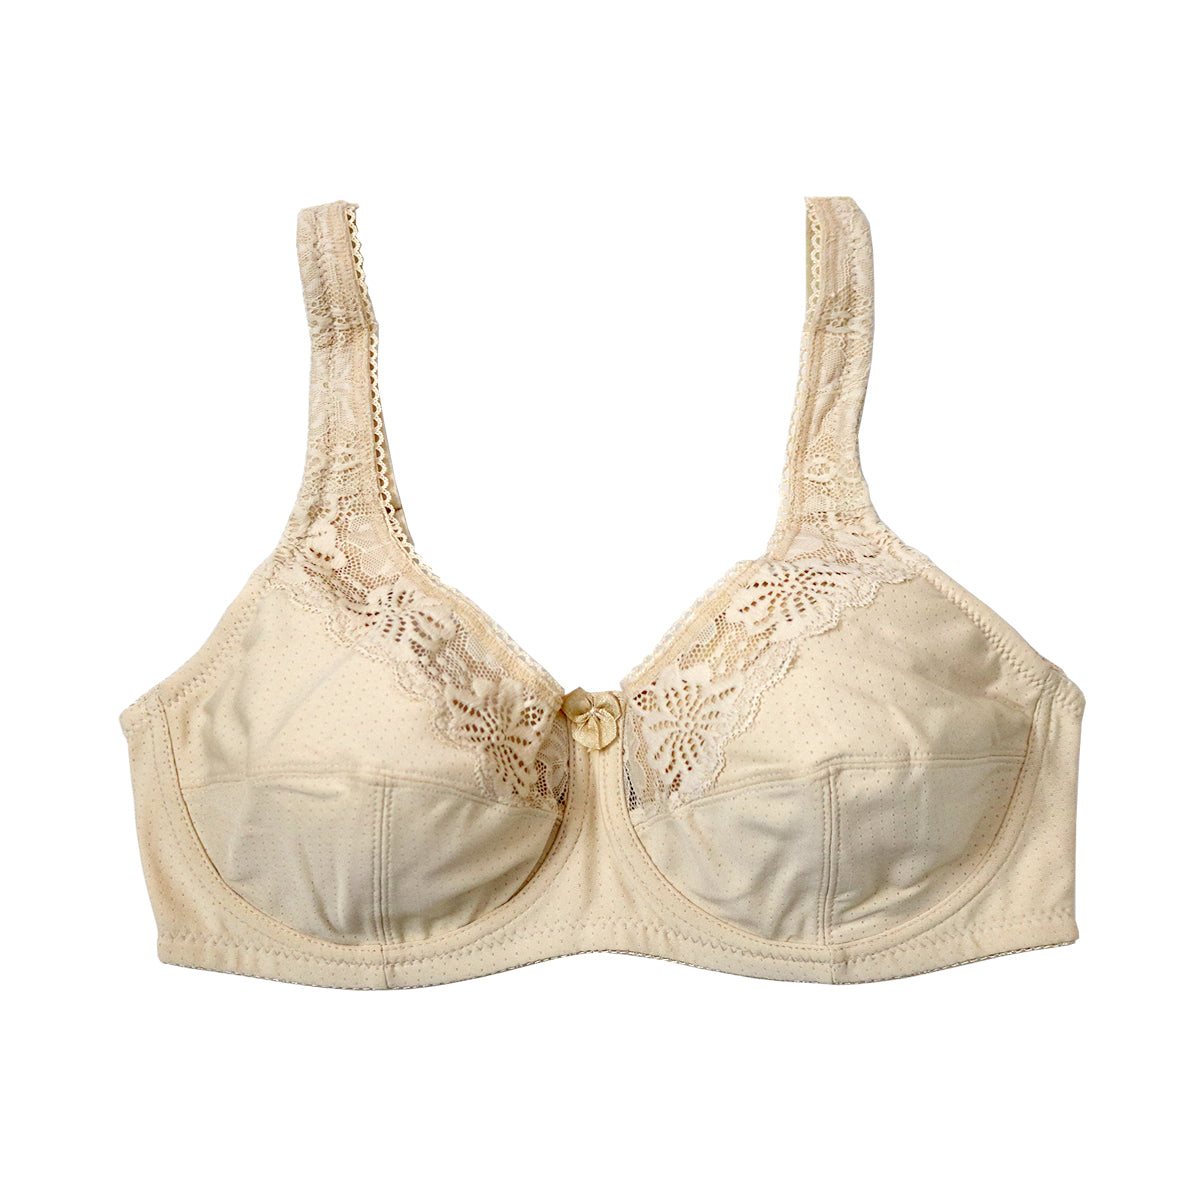 double layered non wired plus size bra